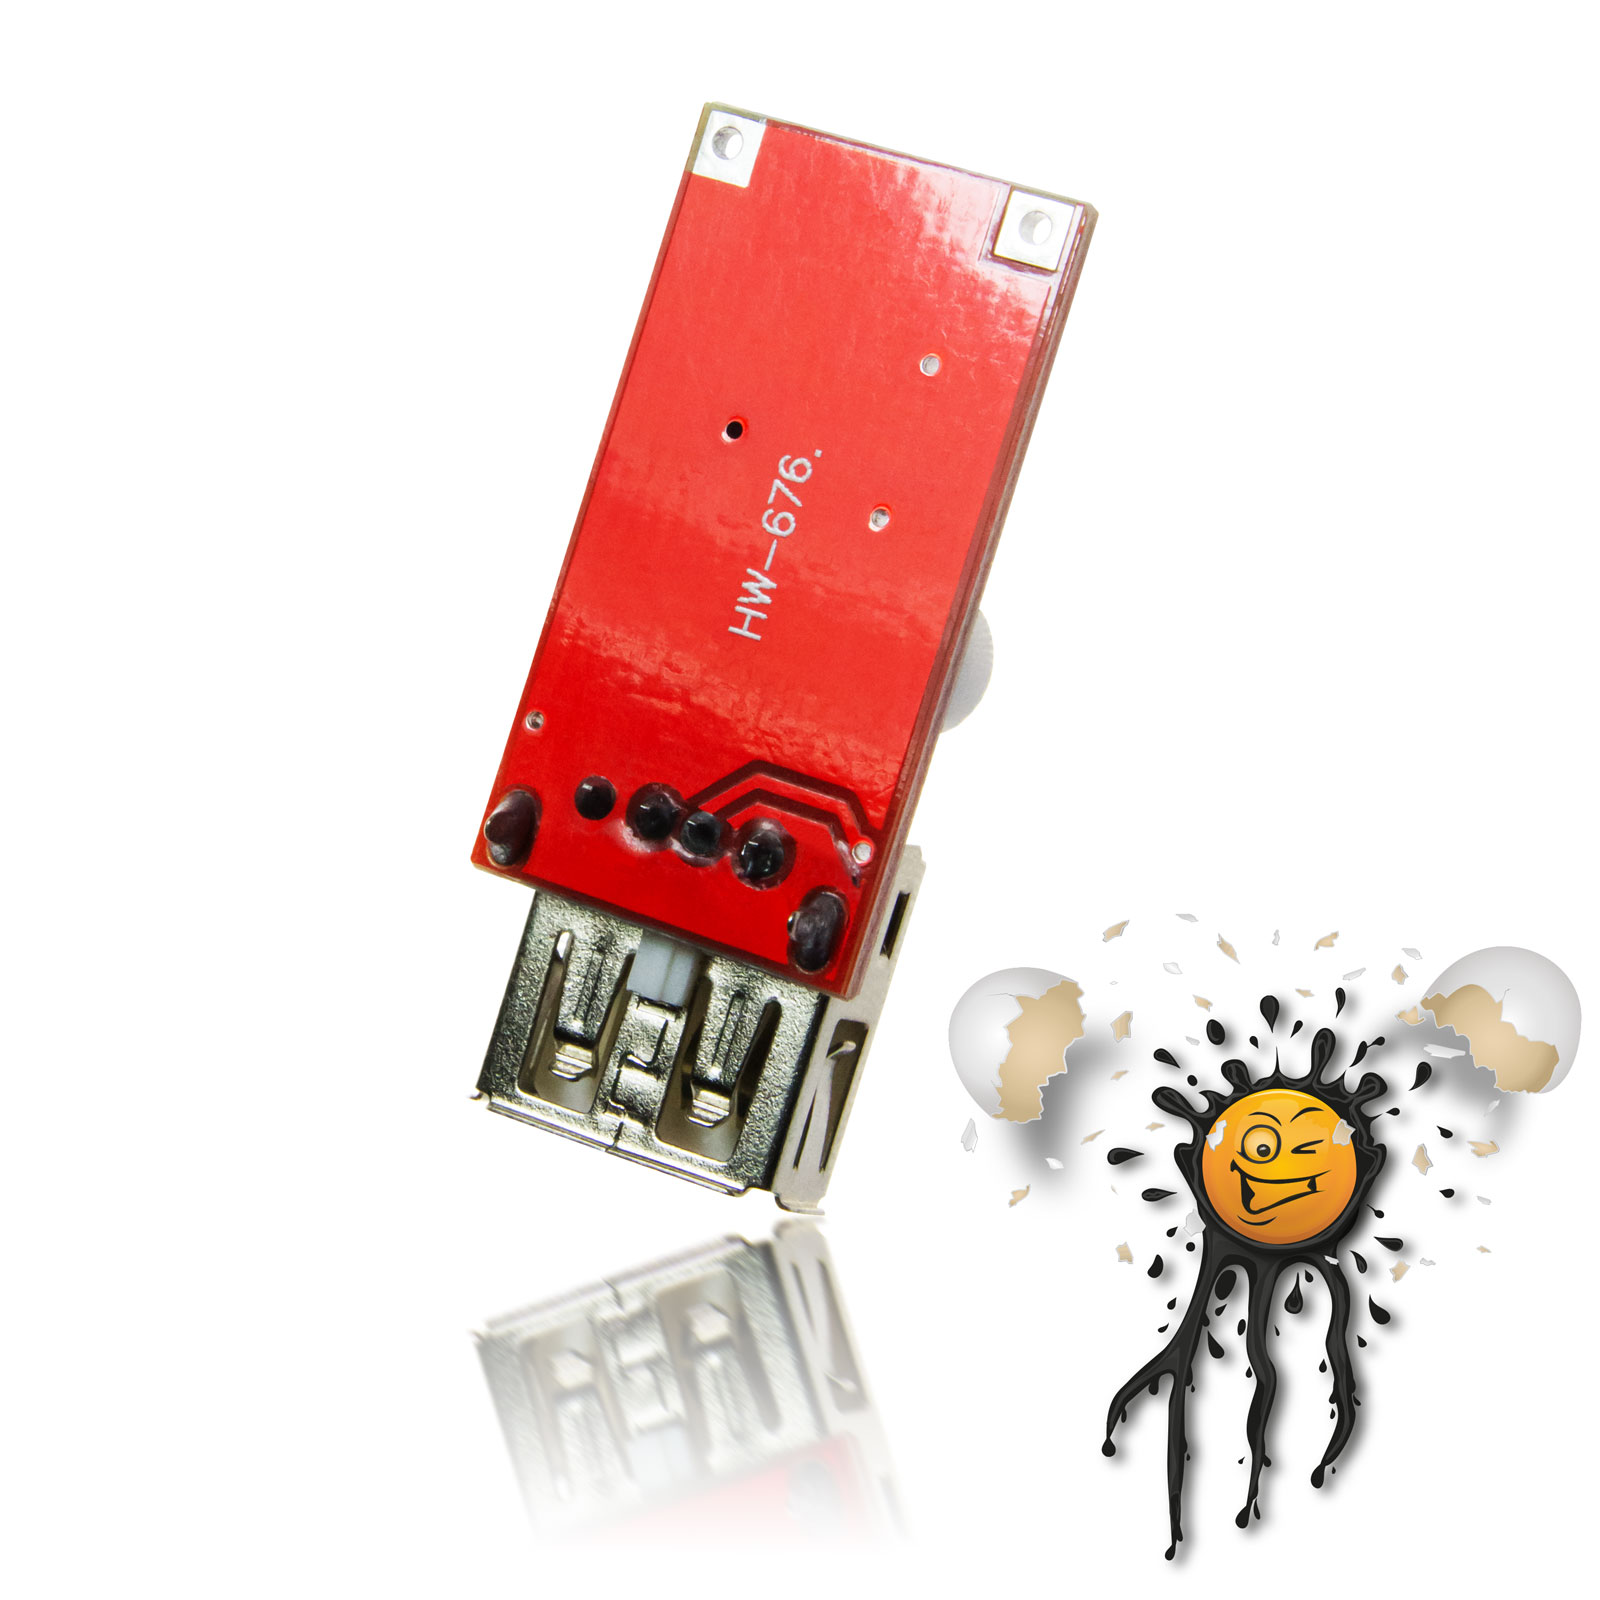 5V USB Spannungswandler single – IoT powered by